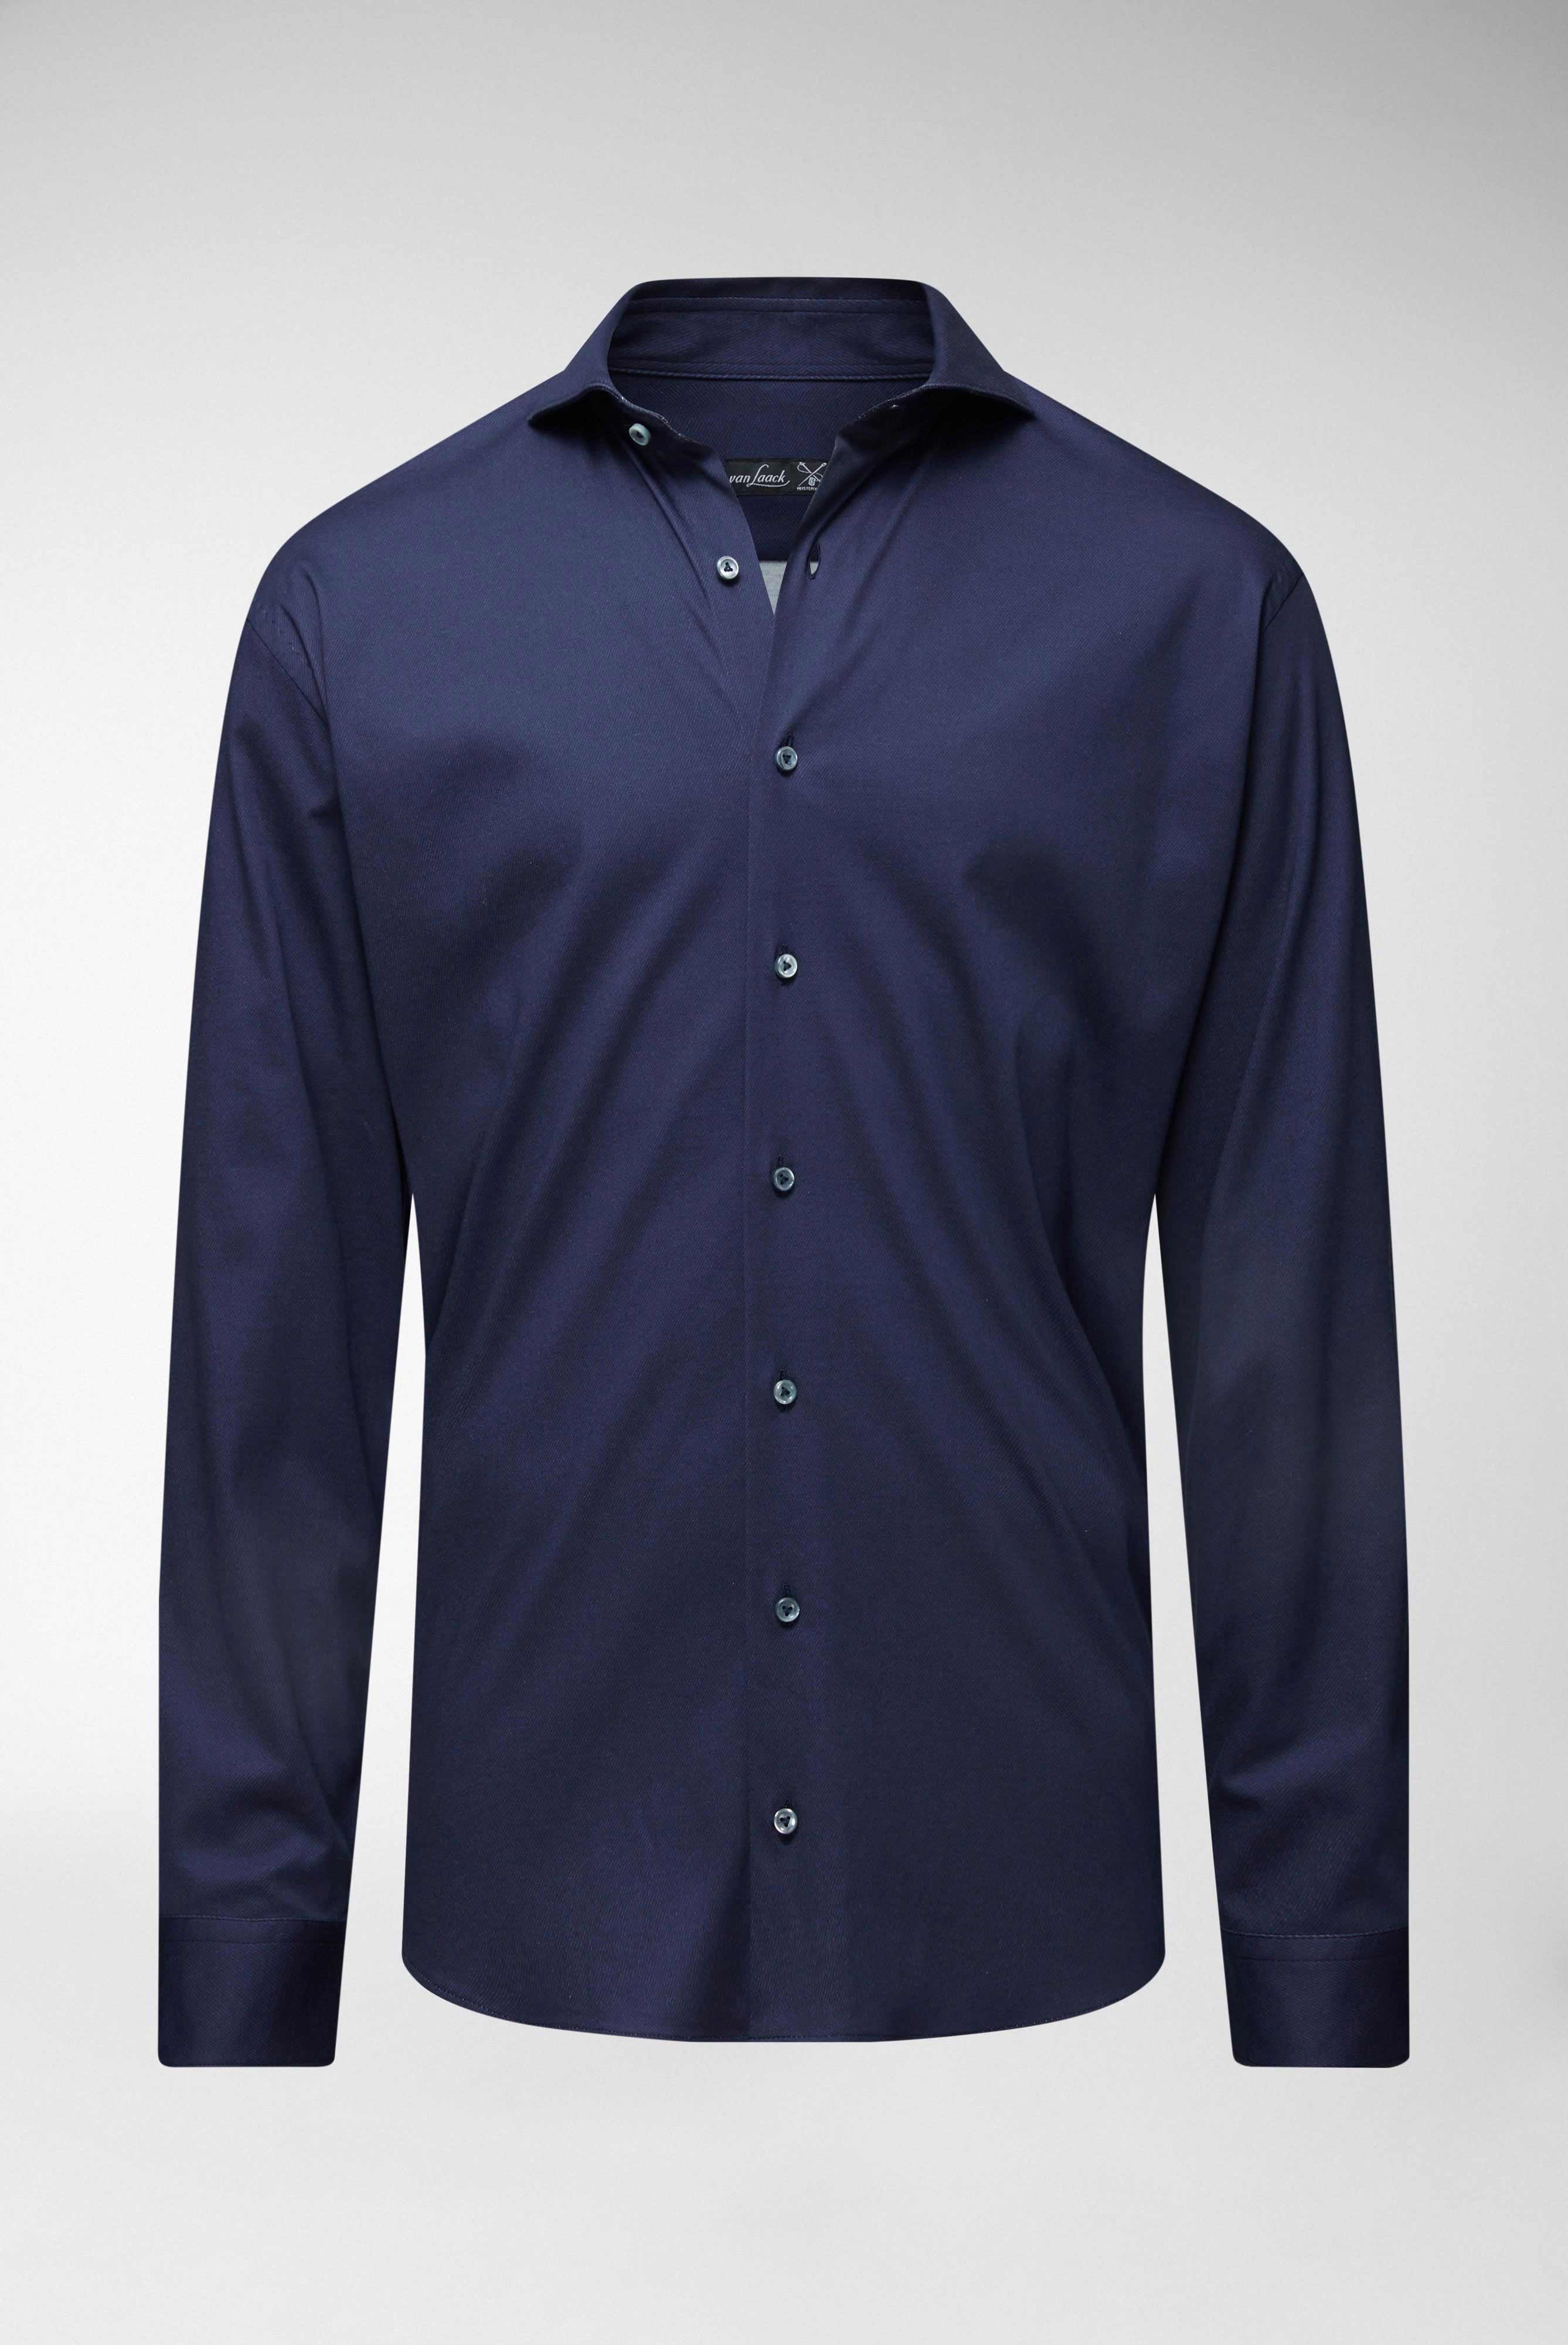 Casual Shirts+Jersey Shirt Twill Printed Tailor Fit+20.1683.UC.187749.690.M